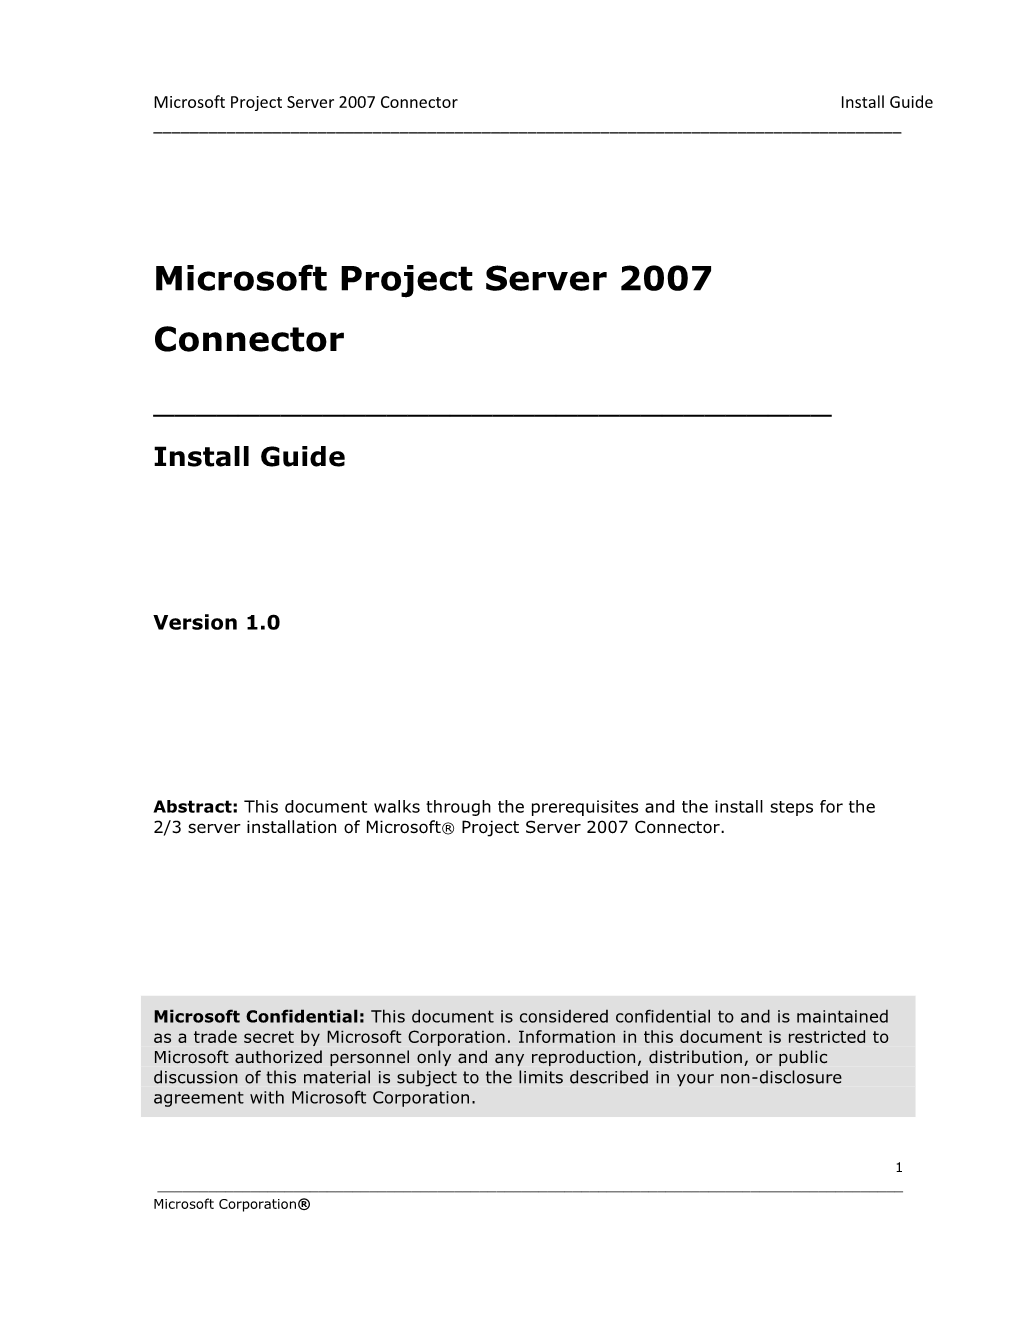 Microsoft Project Server 2007 Connector Installation Guide